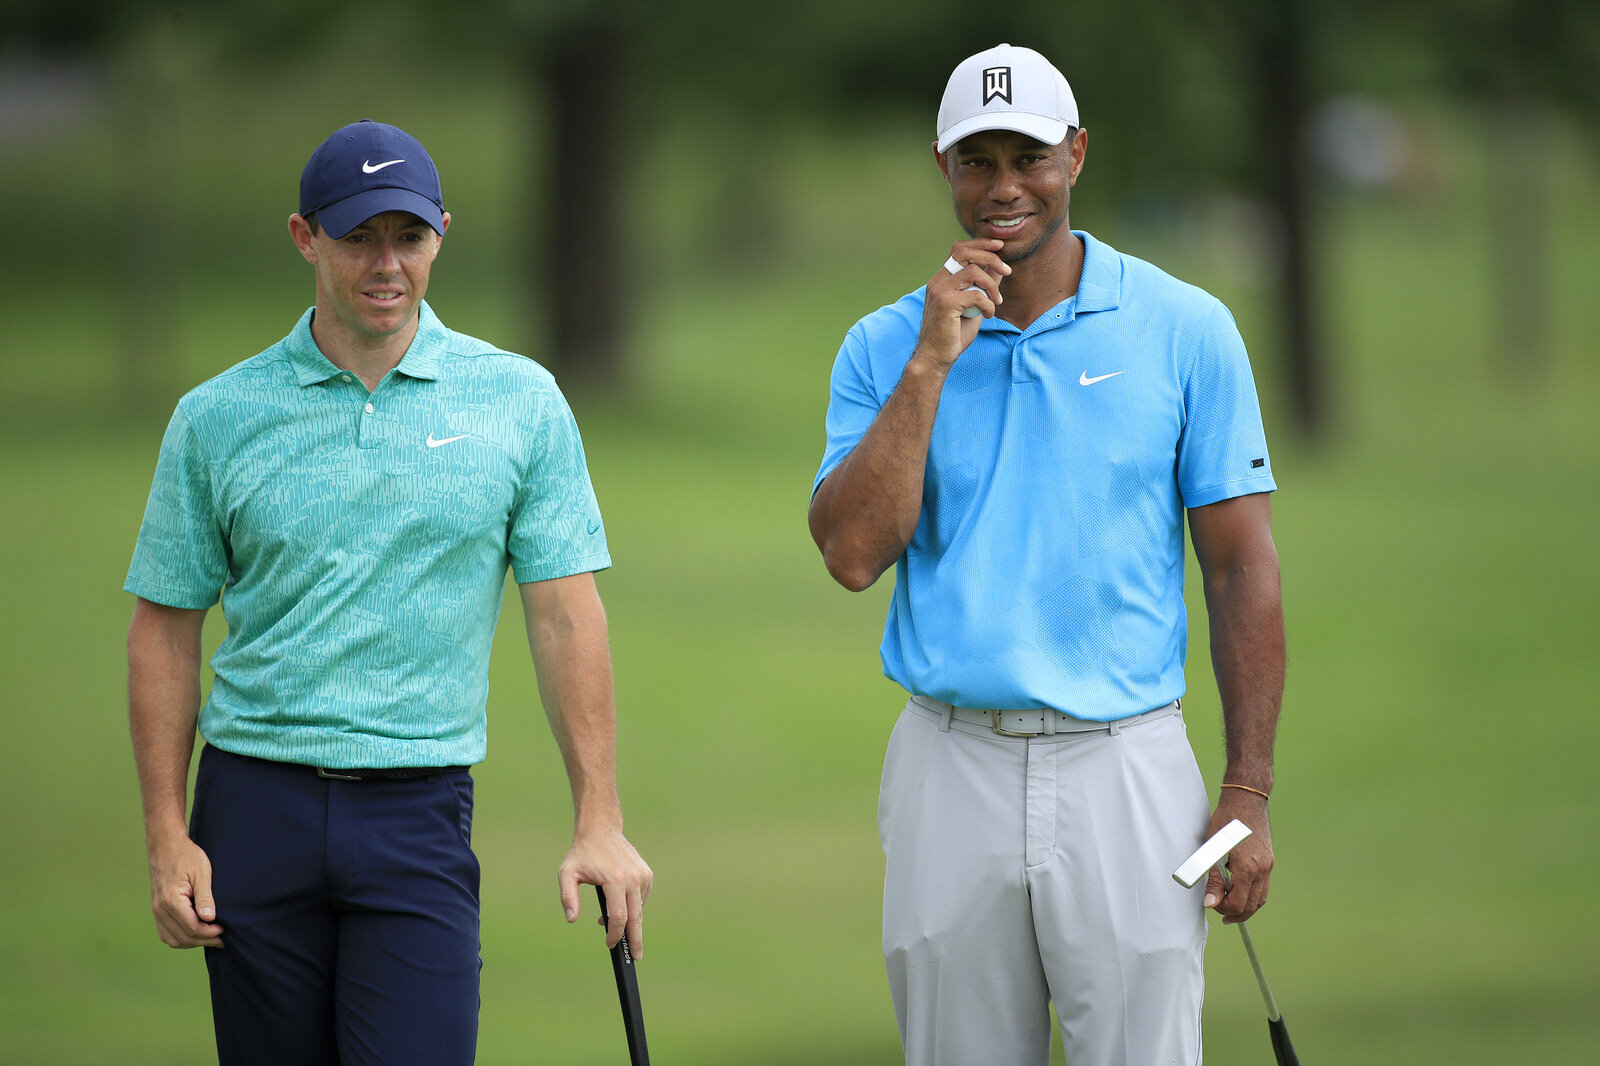  DUBLIN, OHIO - JULY 16: Rory McIlroy of Northern Ireland talks to Tiger Woods of the United States on the tenth green during the first round of The Memorial Tournament on July 16, 2020 at Muirfield Village Golf Club in Dublin, Ohio. (Photo by Andy L